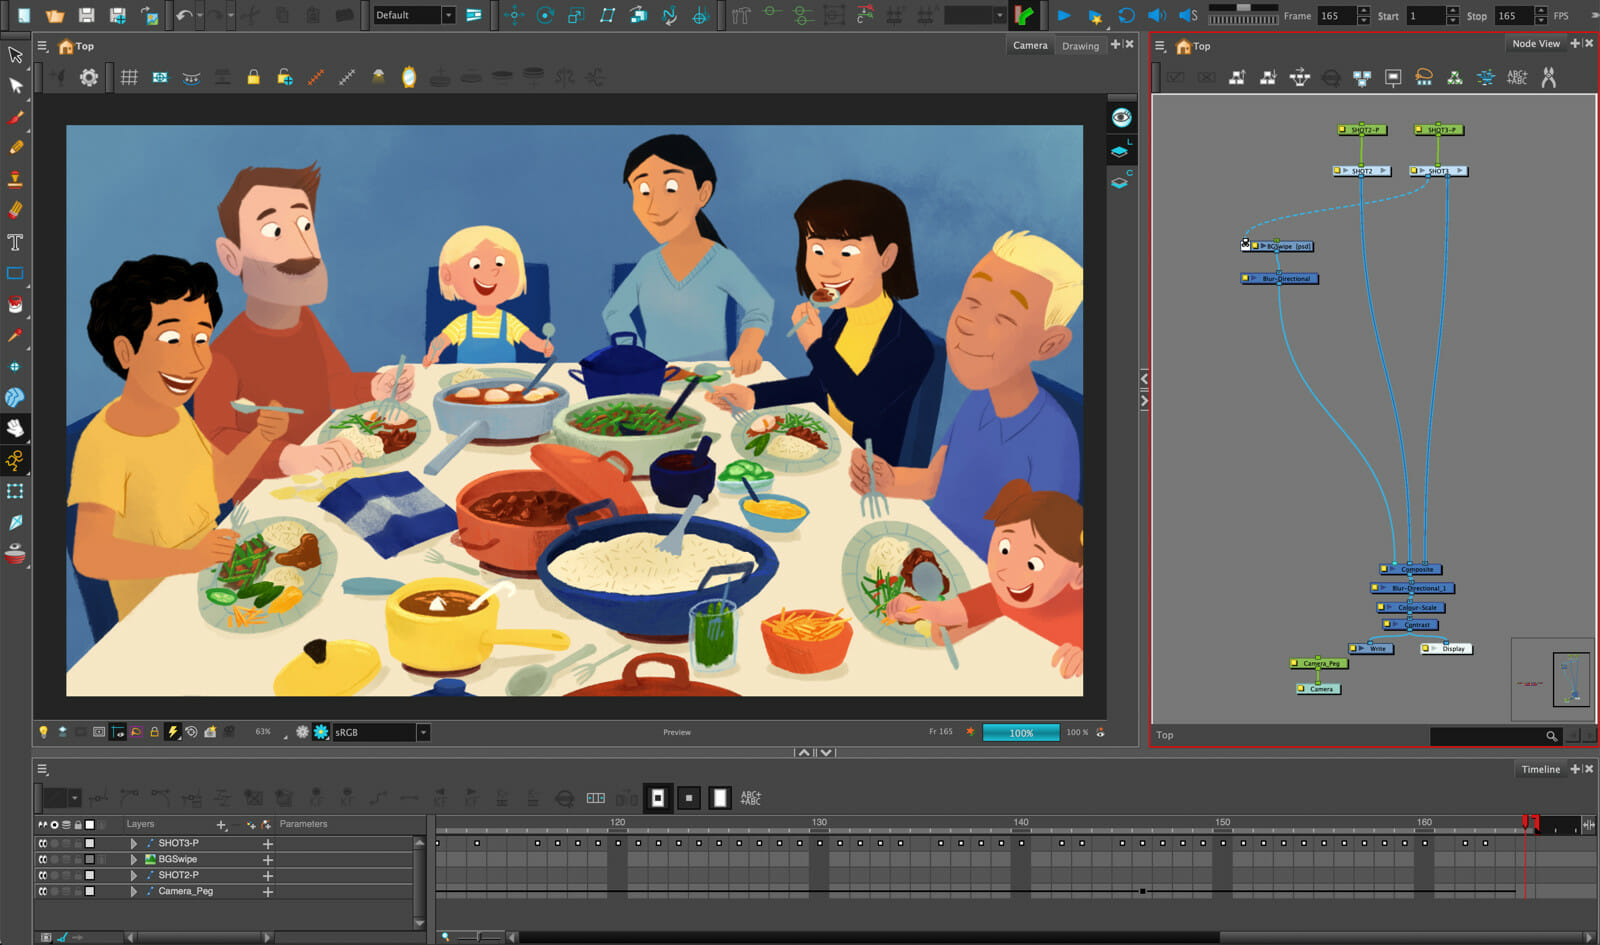 Lieke Wouters's scene for The Ingredients of Animation, featuring a family enjoying Rijsttafel.